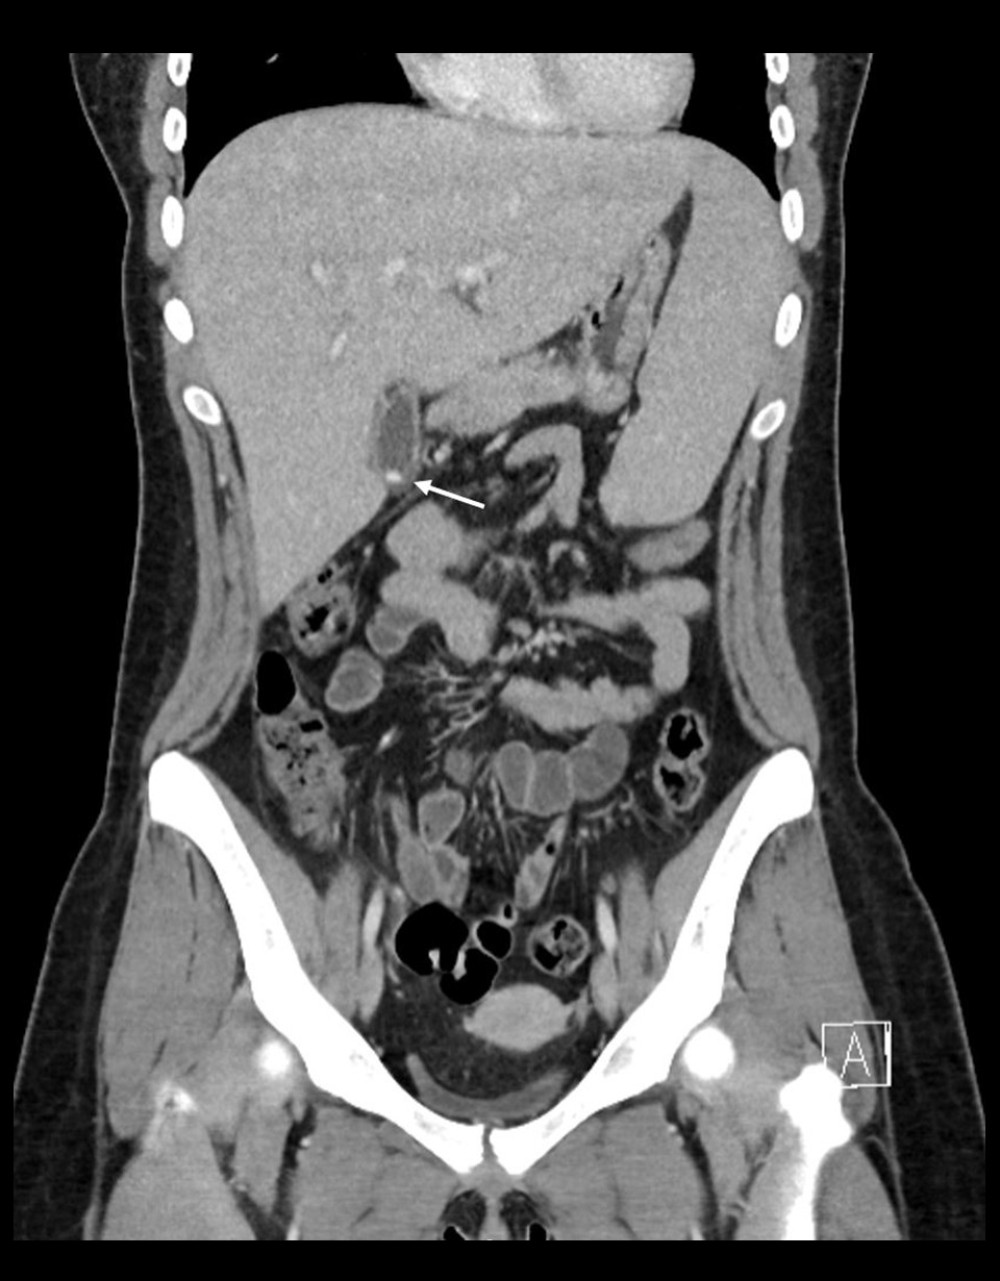 Coronal multiplanar reformat (MPR) from a CT abdomen and pelvis with intravenous contrast, demonstrates splenomegaly with a craniocaudal dimension of 15 cm and mild hepatomegaly with a craniocaudal dimension of 21 cm. In addition, there is a single small gall stone demonstrated (arrow). Appendix was absent.